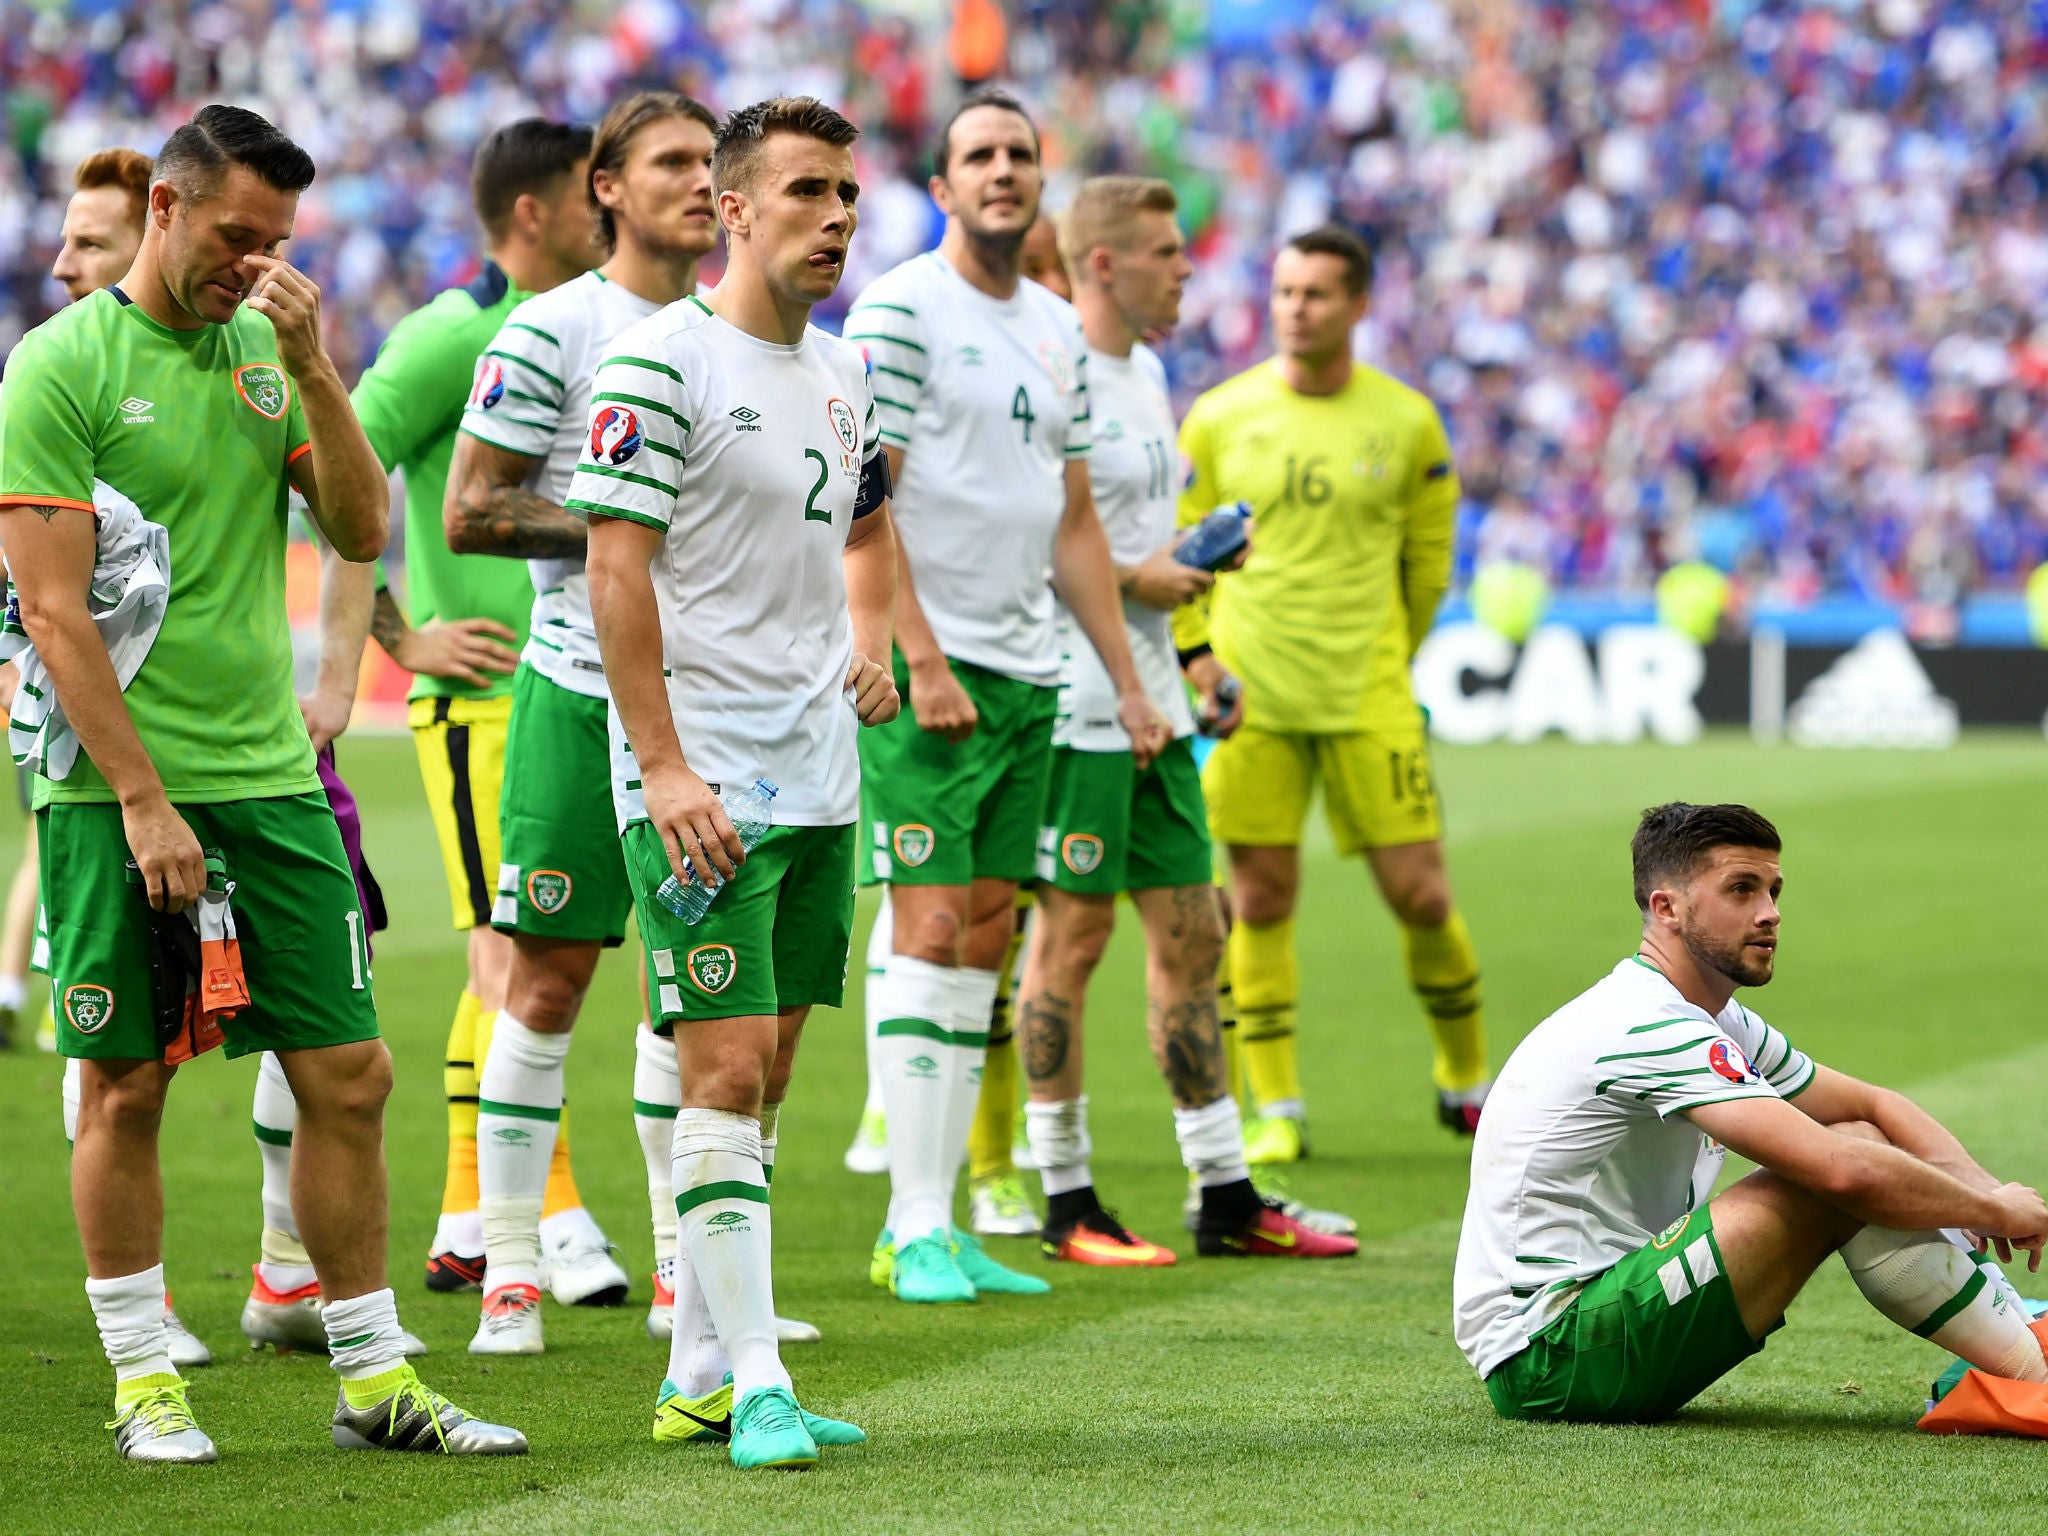 Ireland were sent packing from Euro 2016 at the quarter-final stage